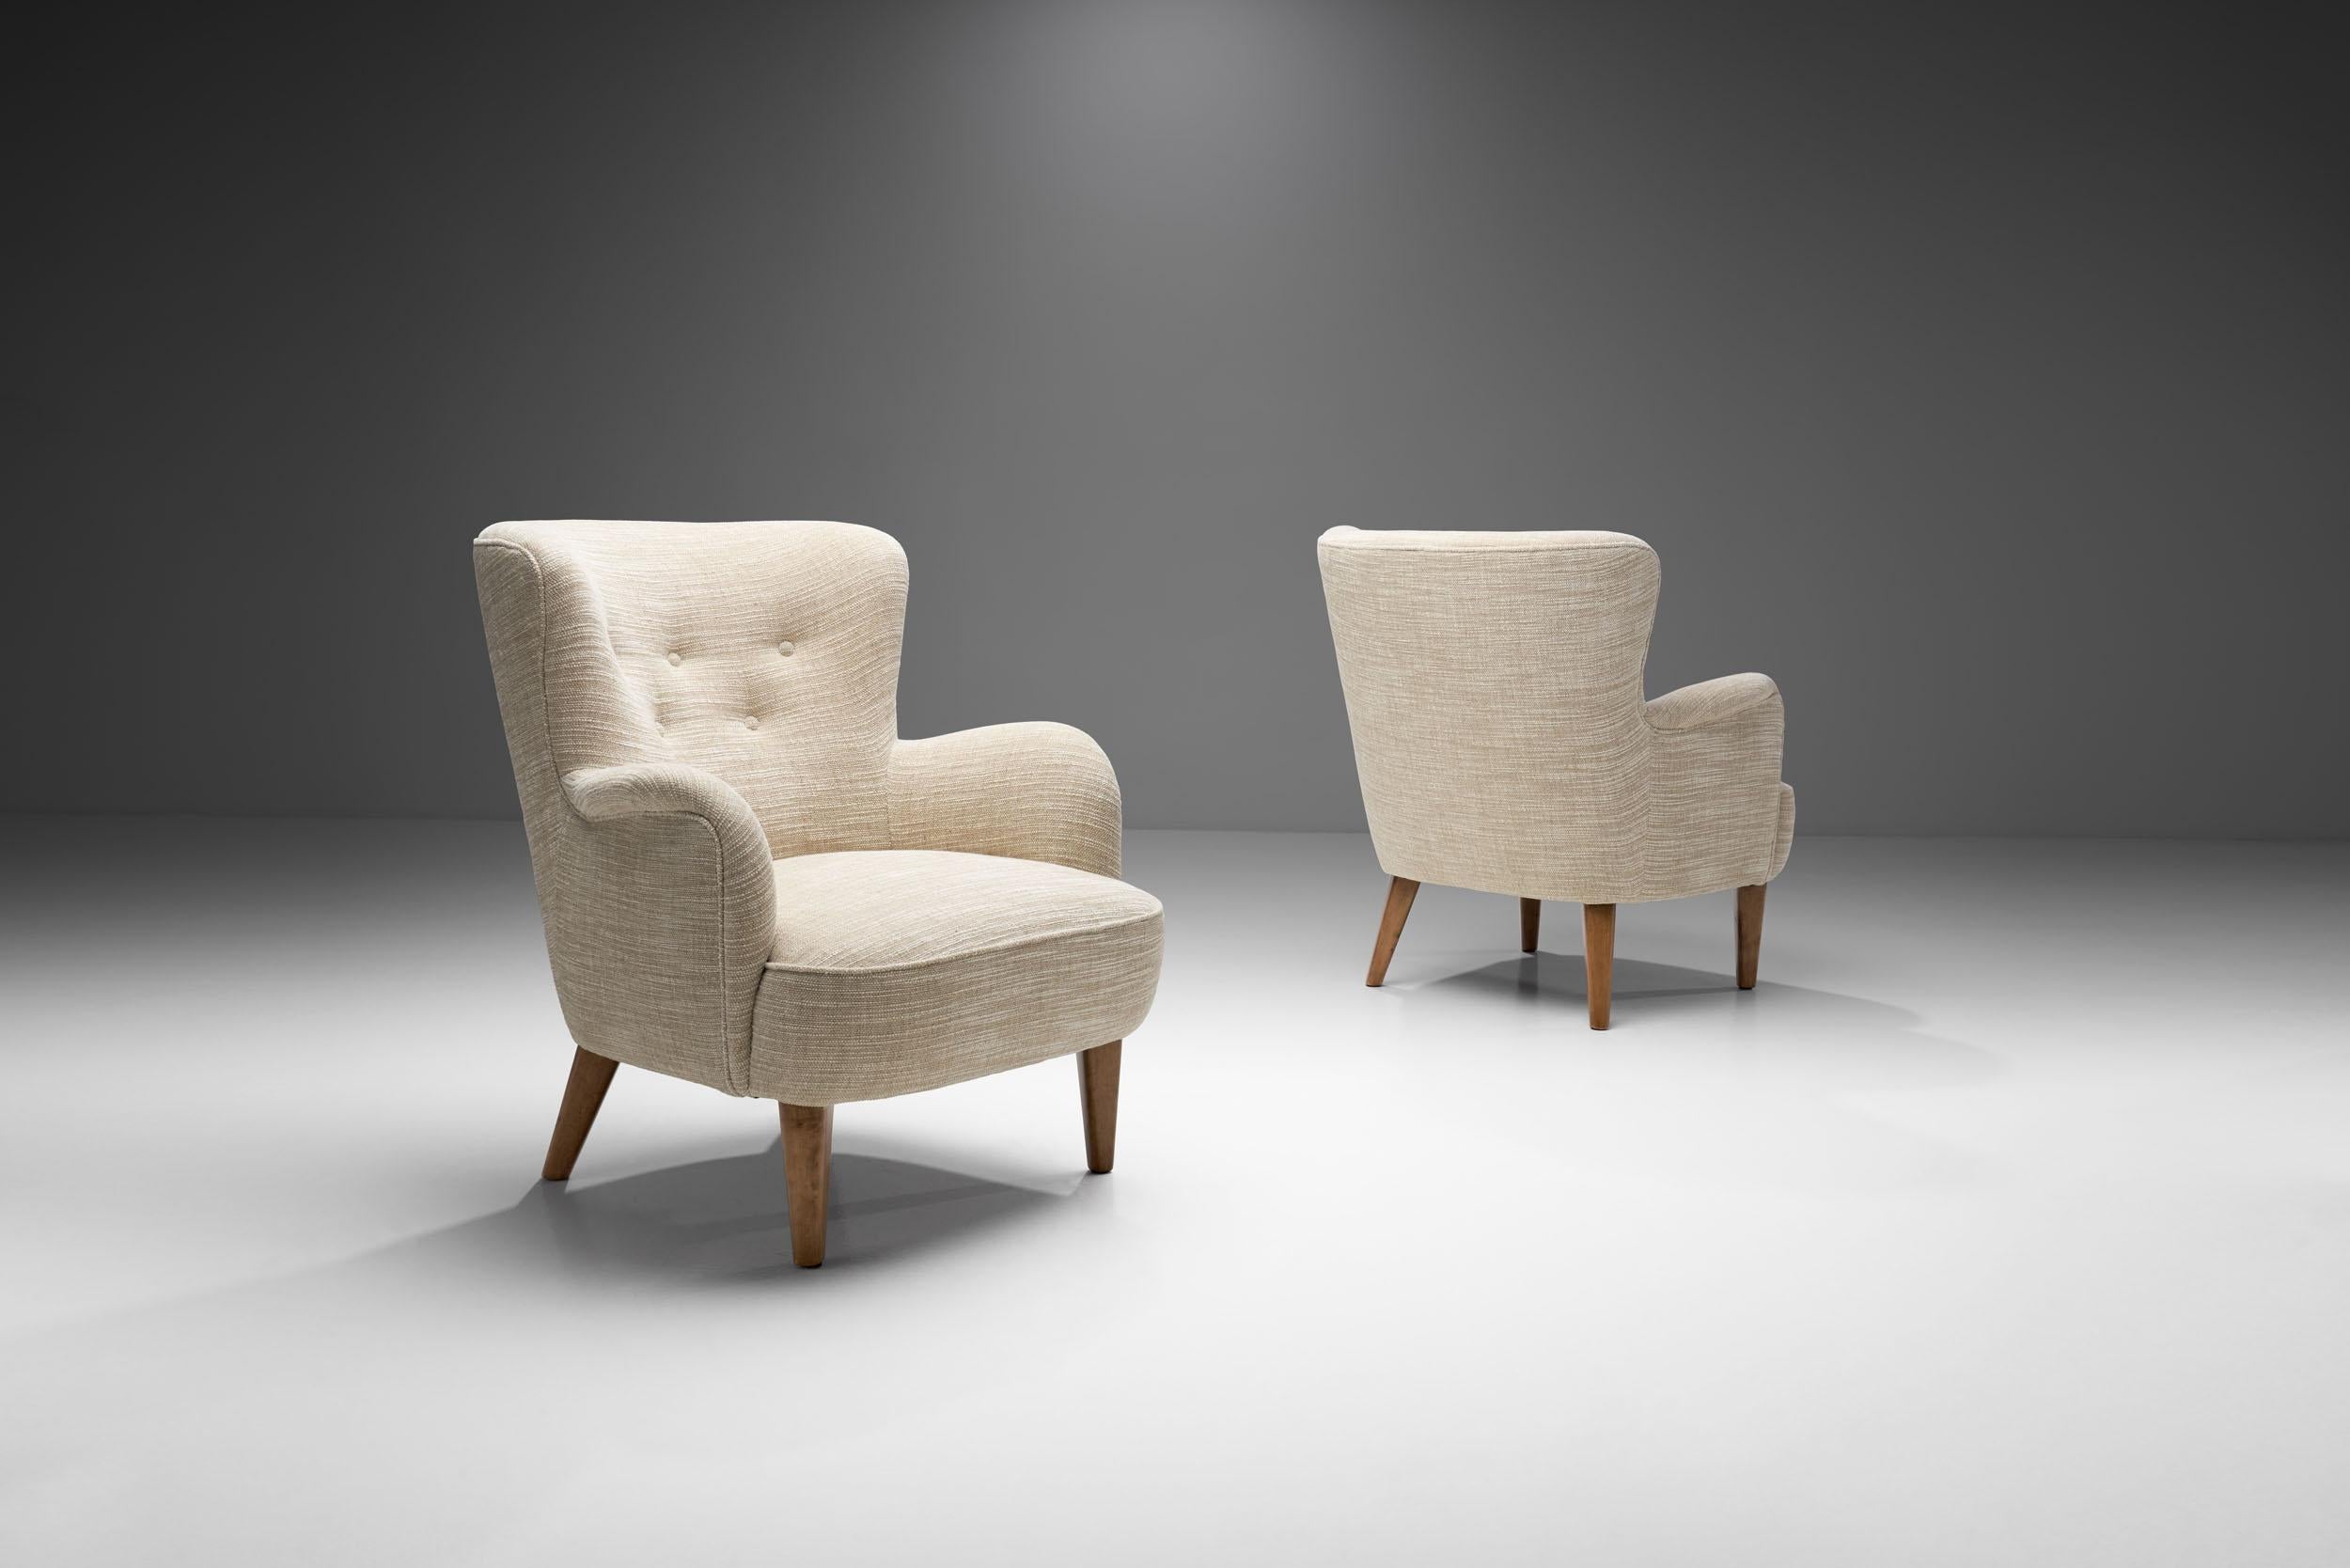 Mid-20th Century Pair of Mid-Century Armchairs by a Swedish Cabinetmaker, Sweden, ca 1950s